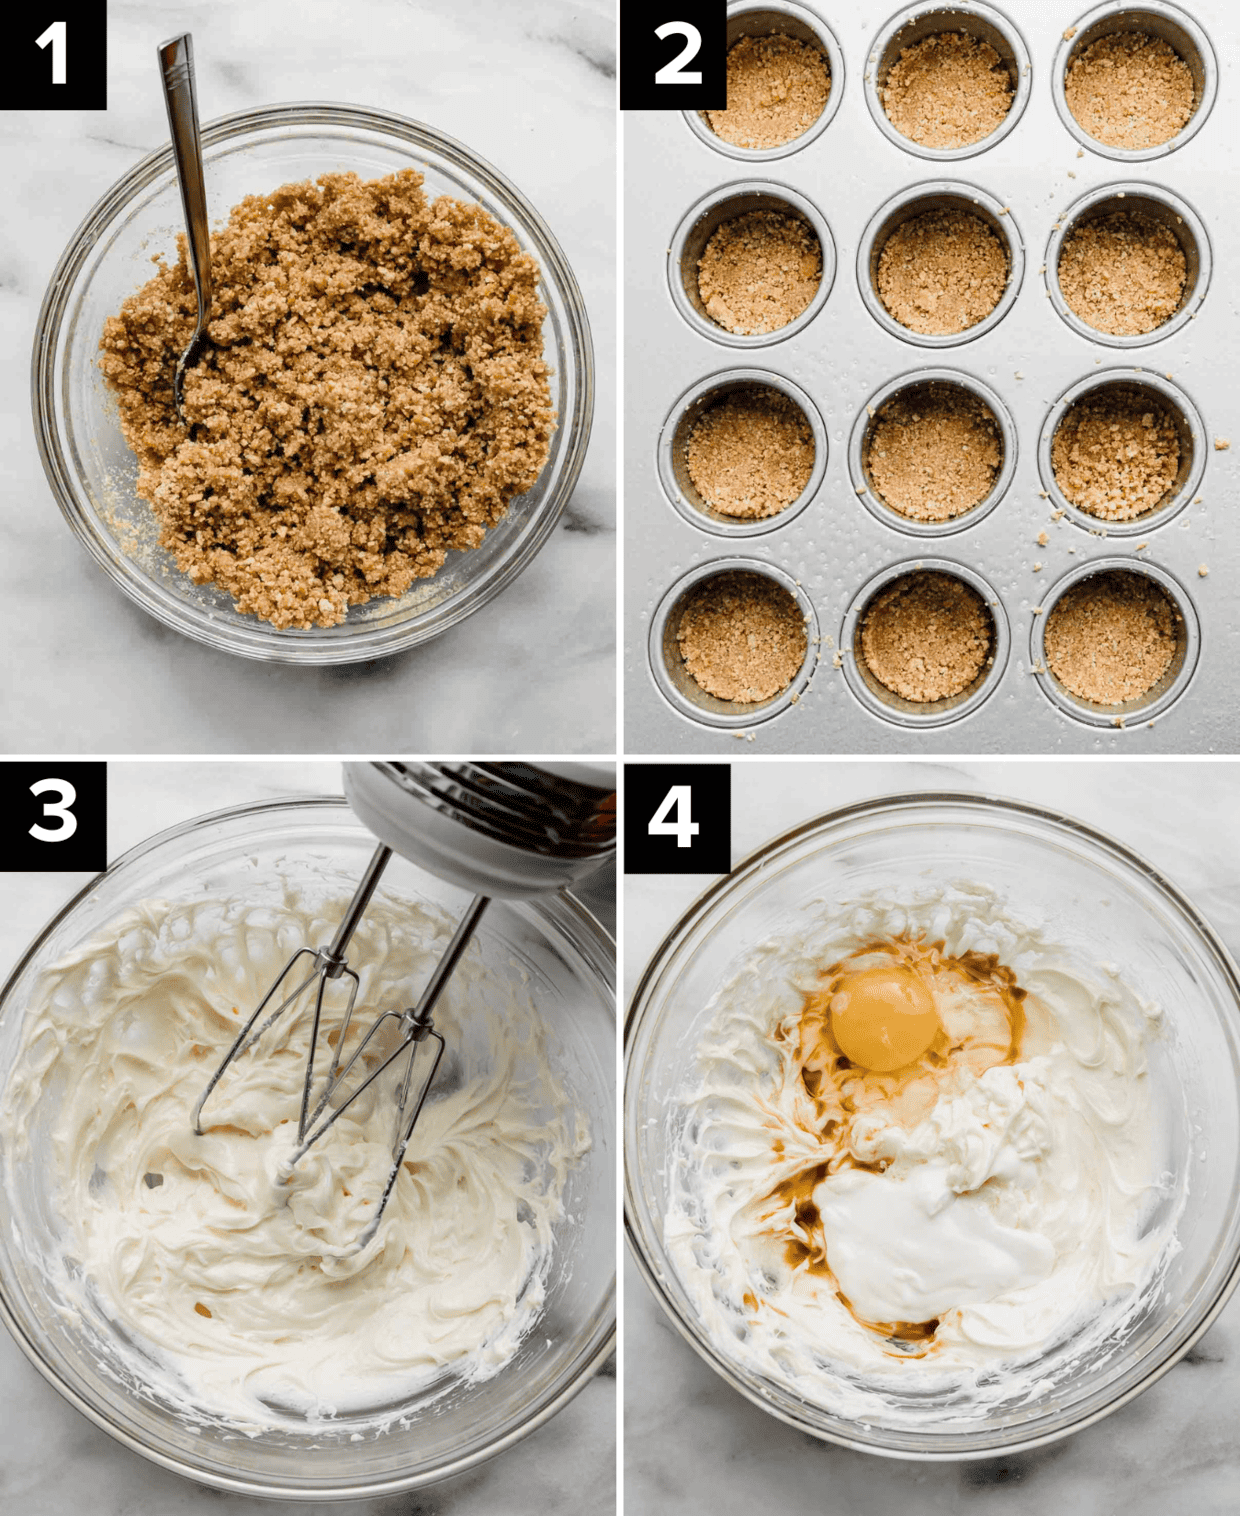 Four photos showing how to make Mini Cheesecakes crust with graham cracker crumbs and the beginning of creaming cream cheese in a glass bowl.